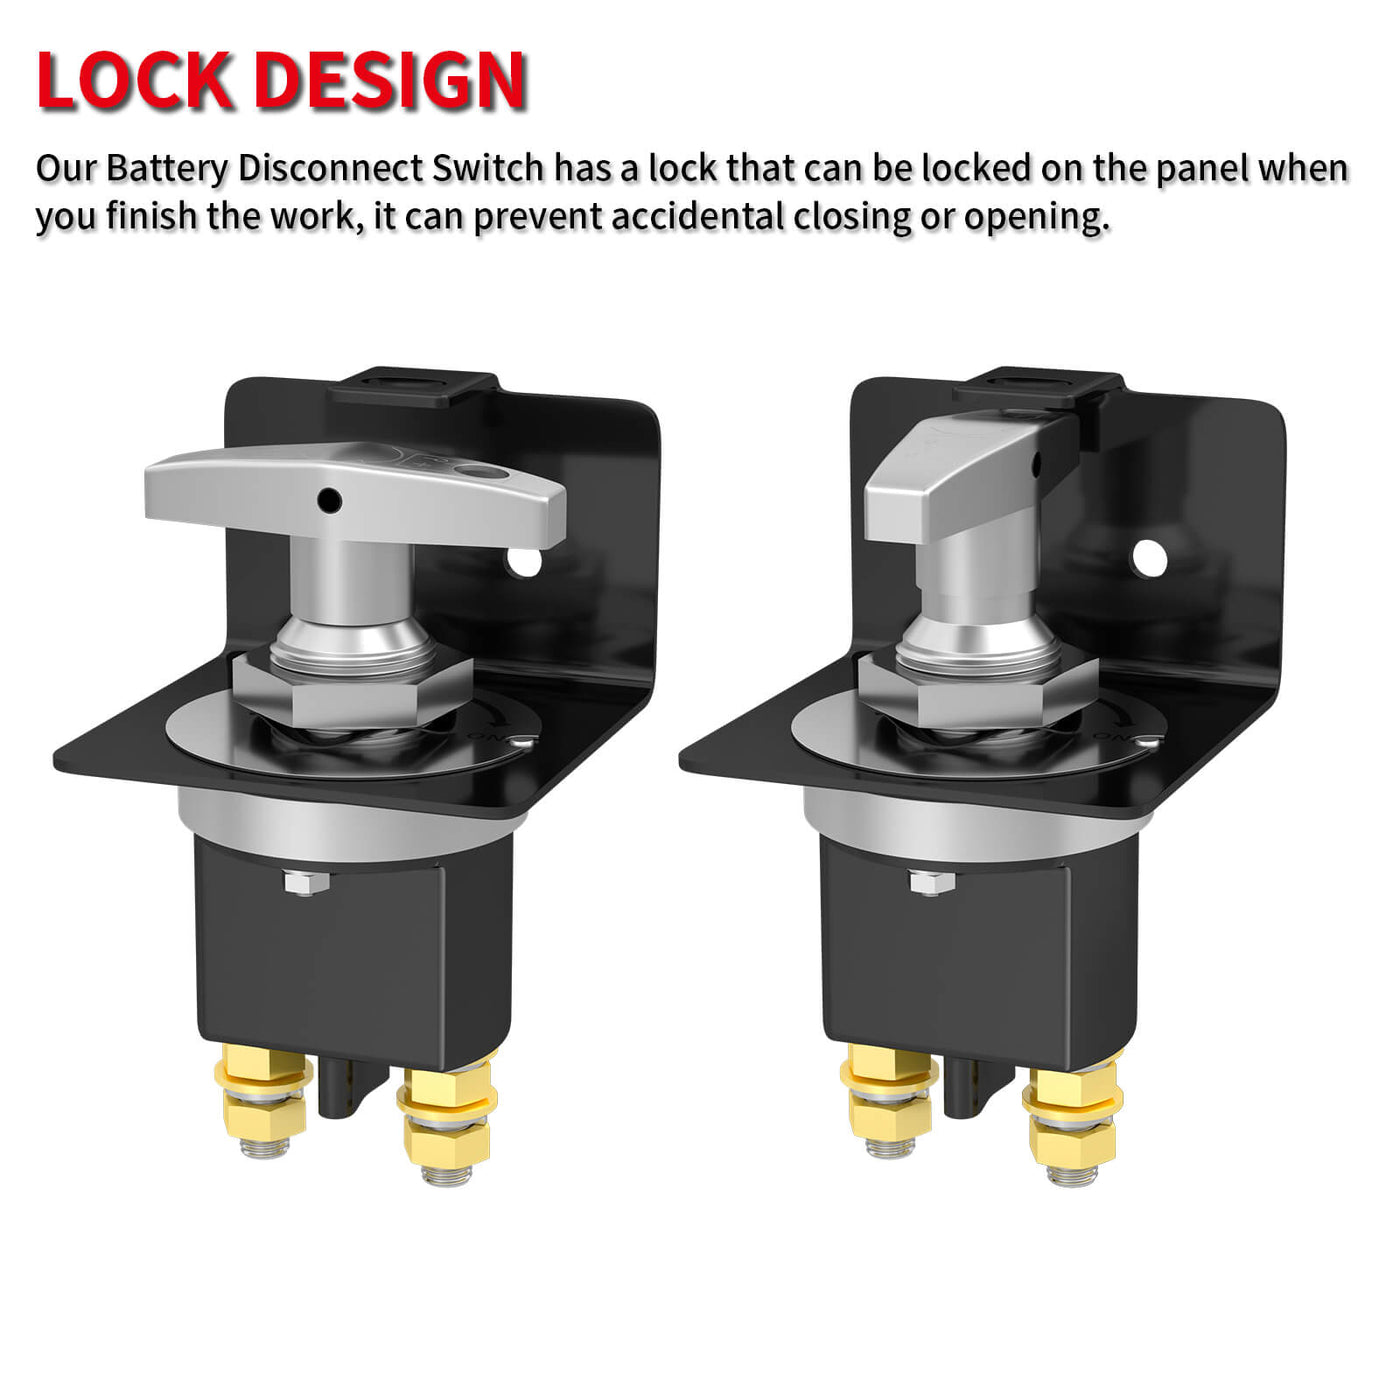 Kill Switch with Lock-out Plate Battery Disconnect Switch lock design